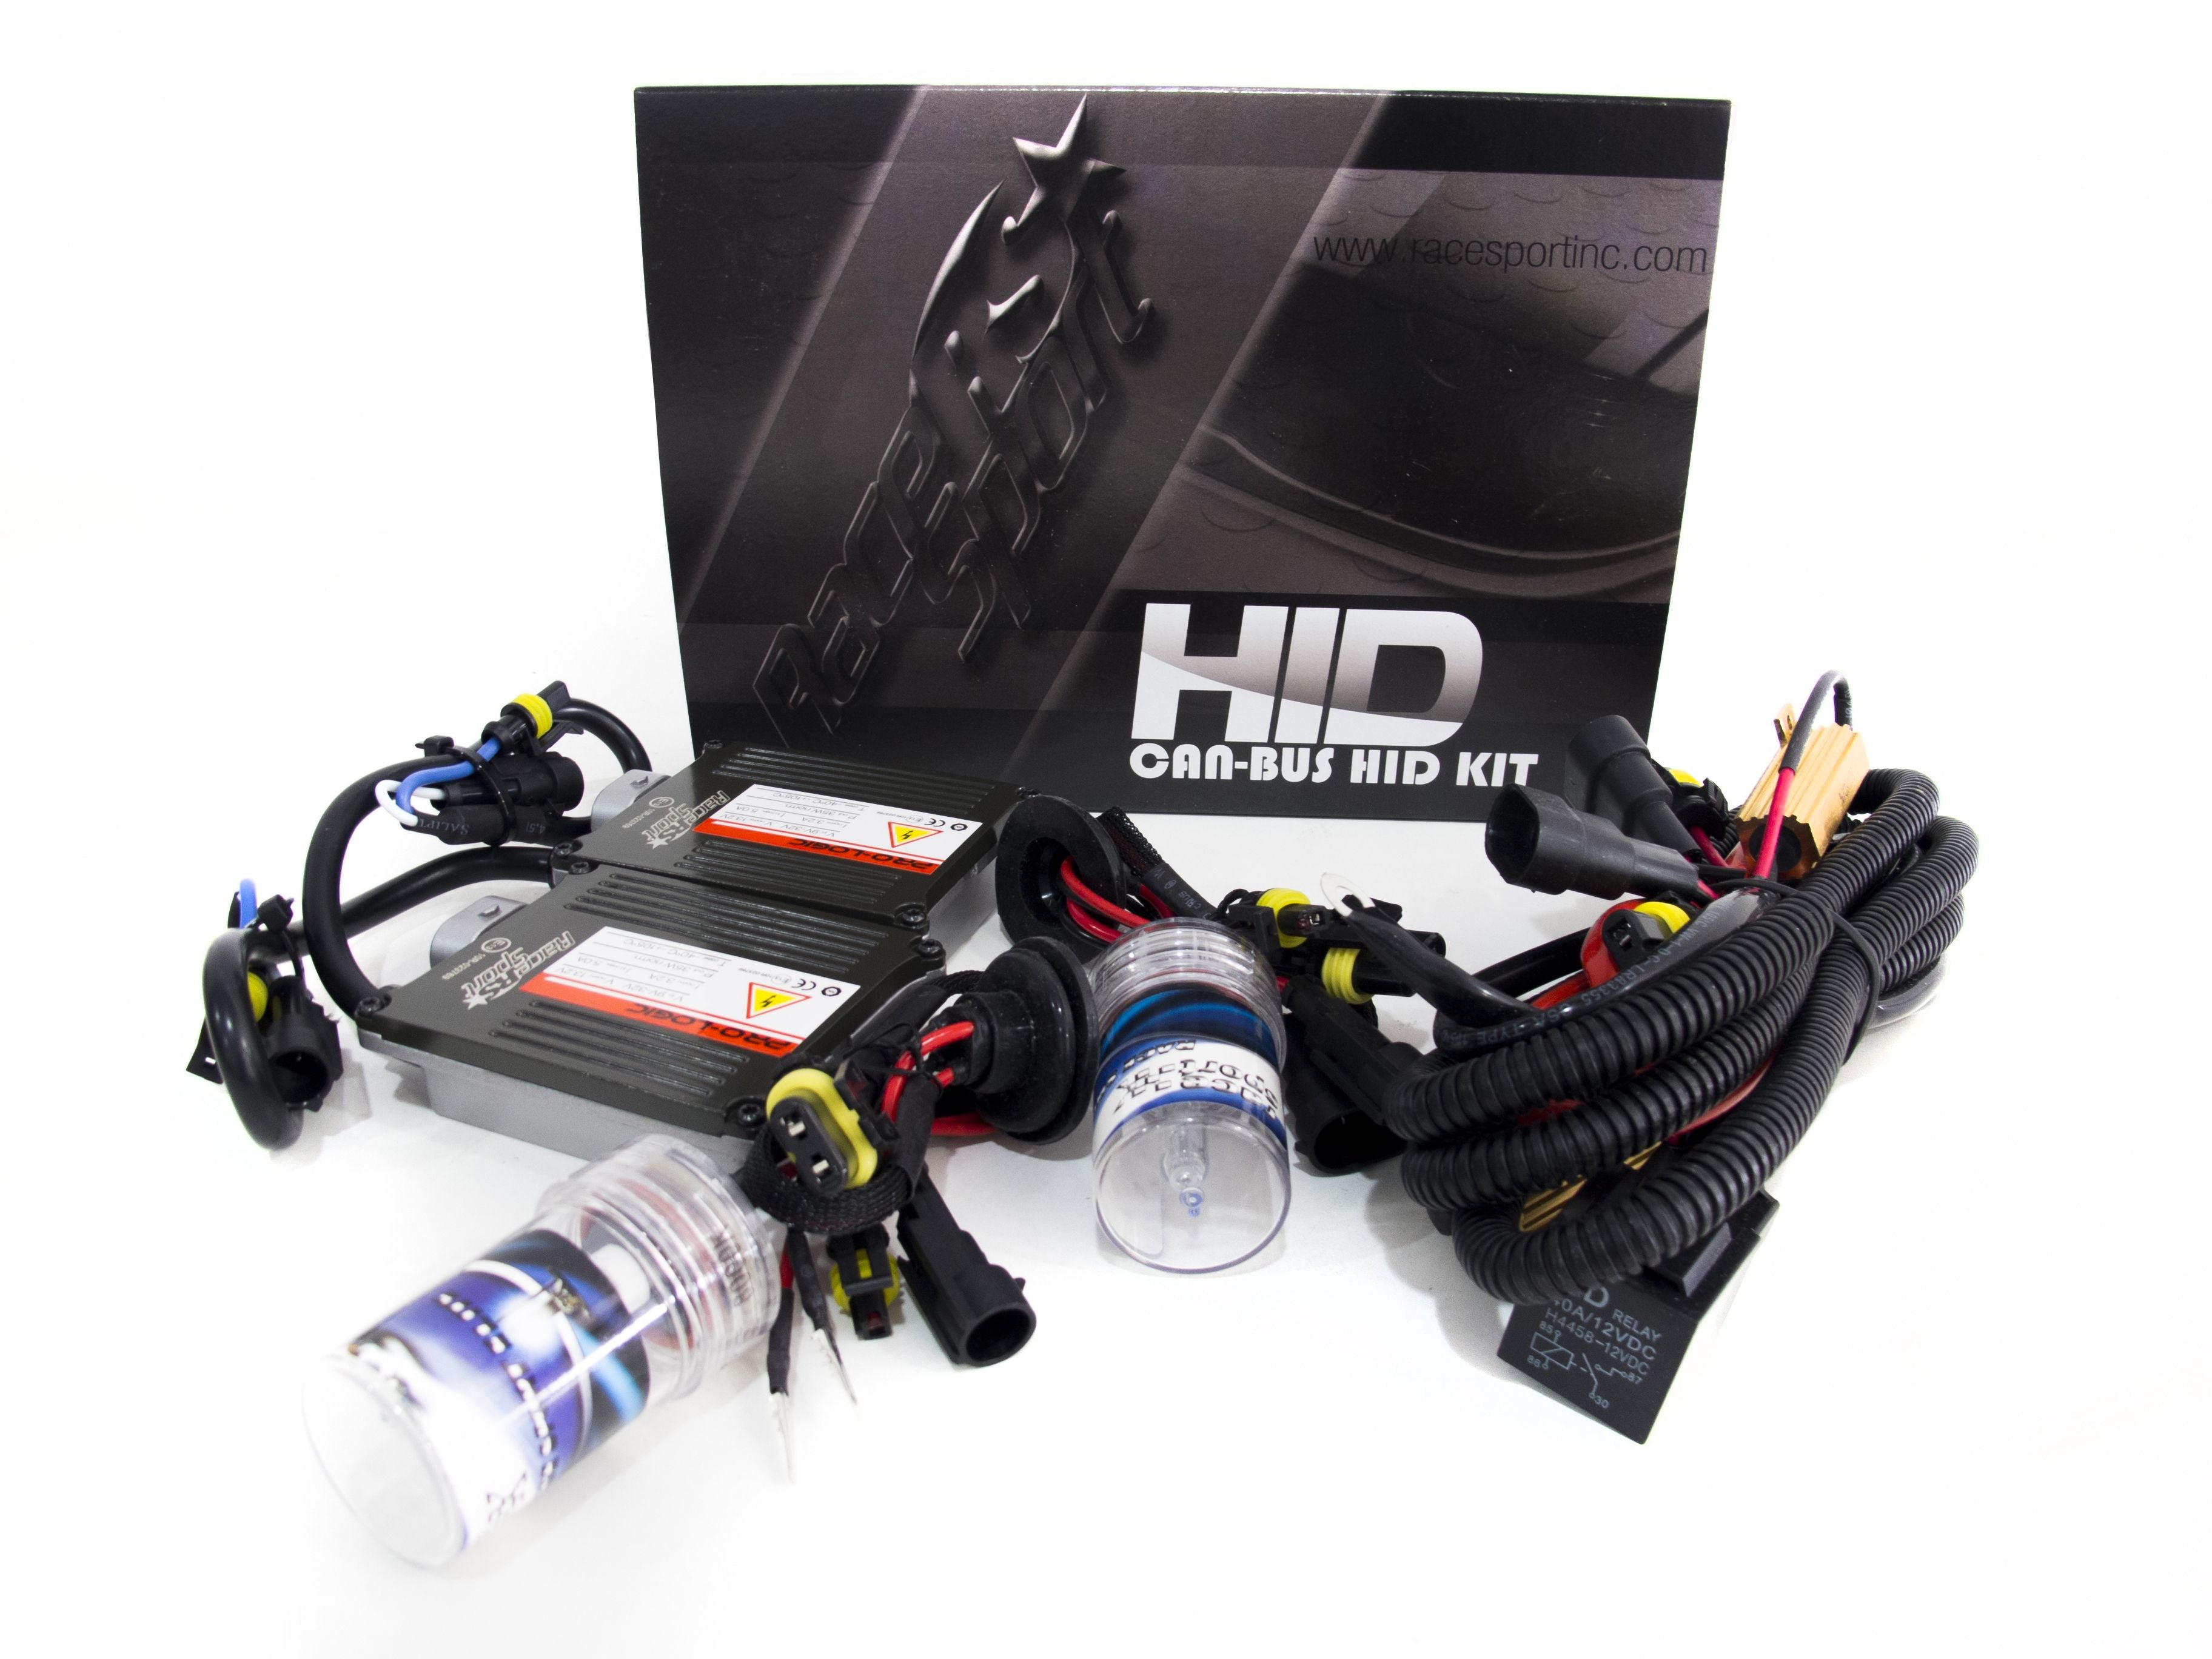 Race Sport H8 GEN1 Mid-Slim Canbus HID Ballast Kit with Relay Resistor Harness H8-6K-G1-CANBUS-R